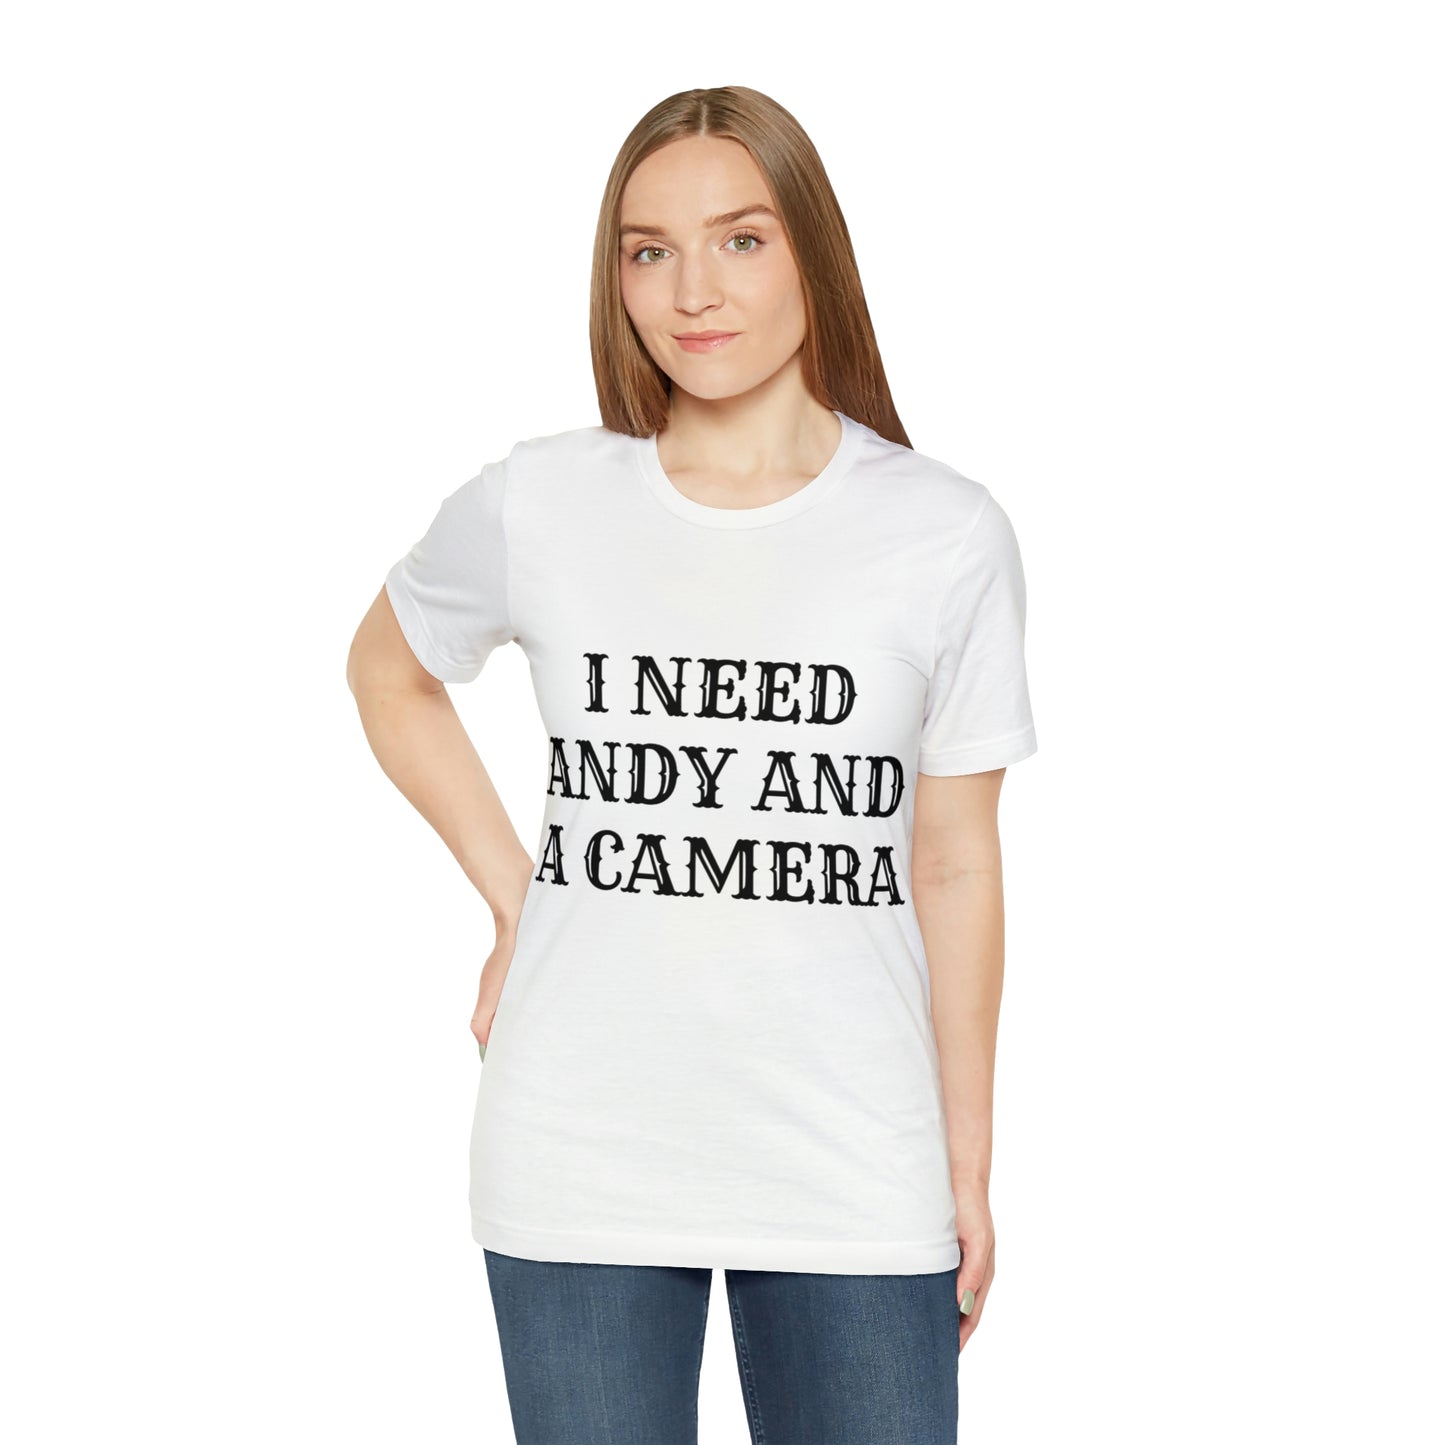 I Need Andy and a Camera Bravo Scandoval Unisex Jersey Short Sleeve Tee Shirt